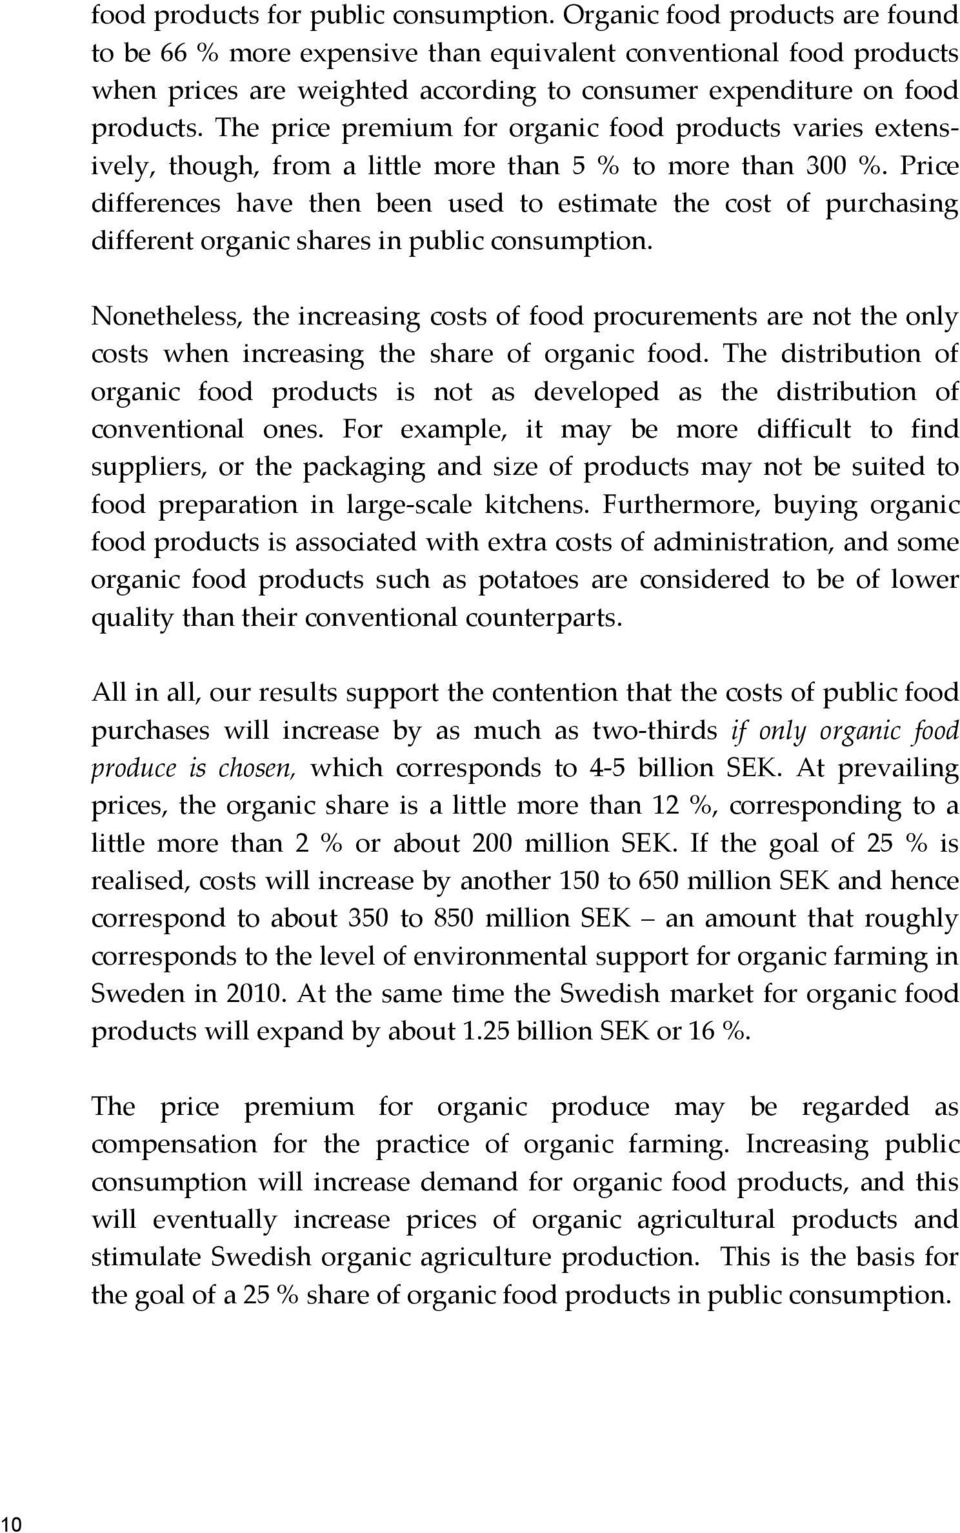 The price premium for organic food products varies extensively, though, from a little more than 5 % to more than 300 %.